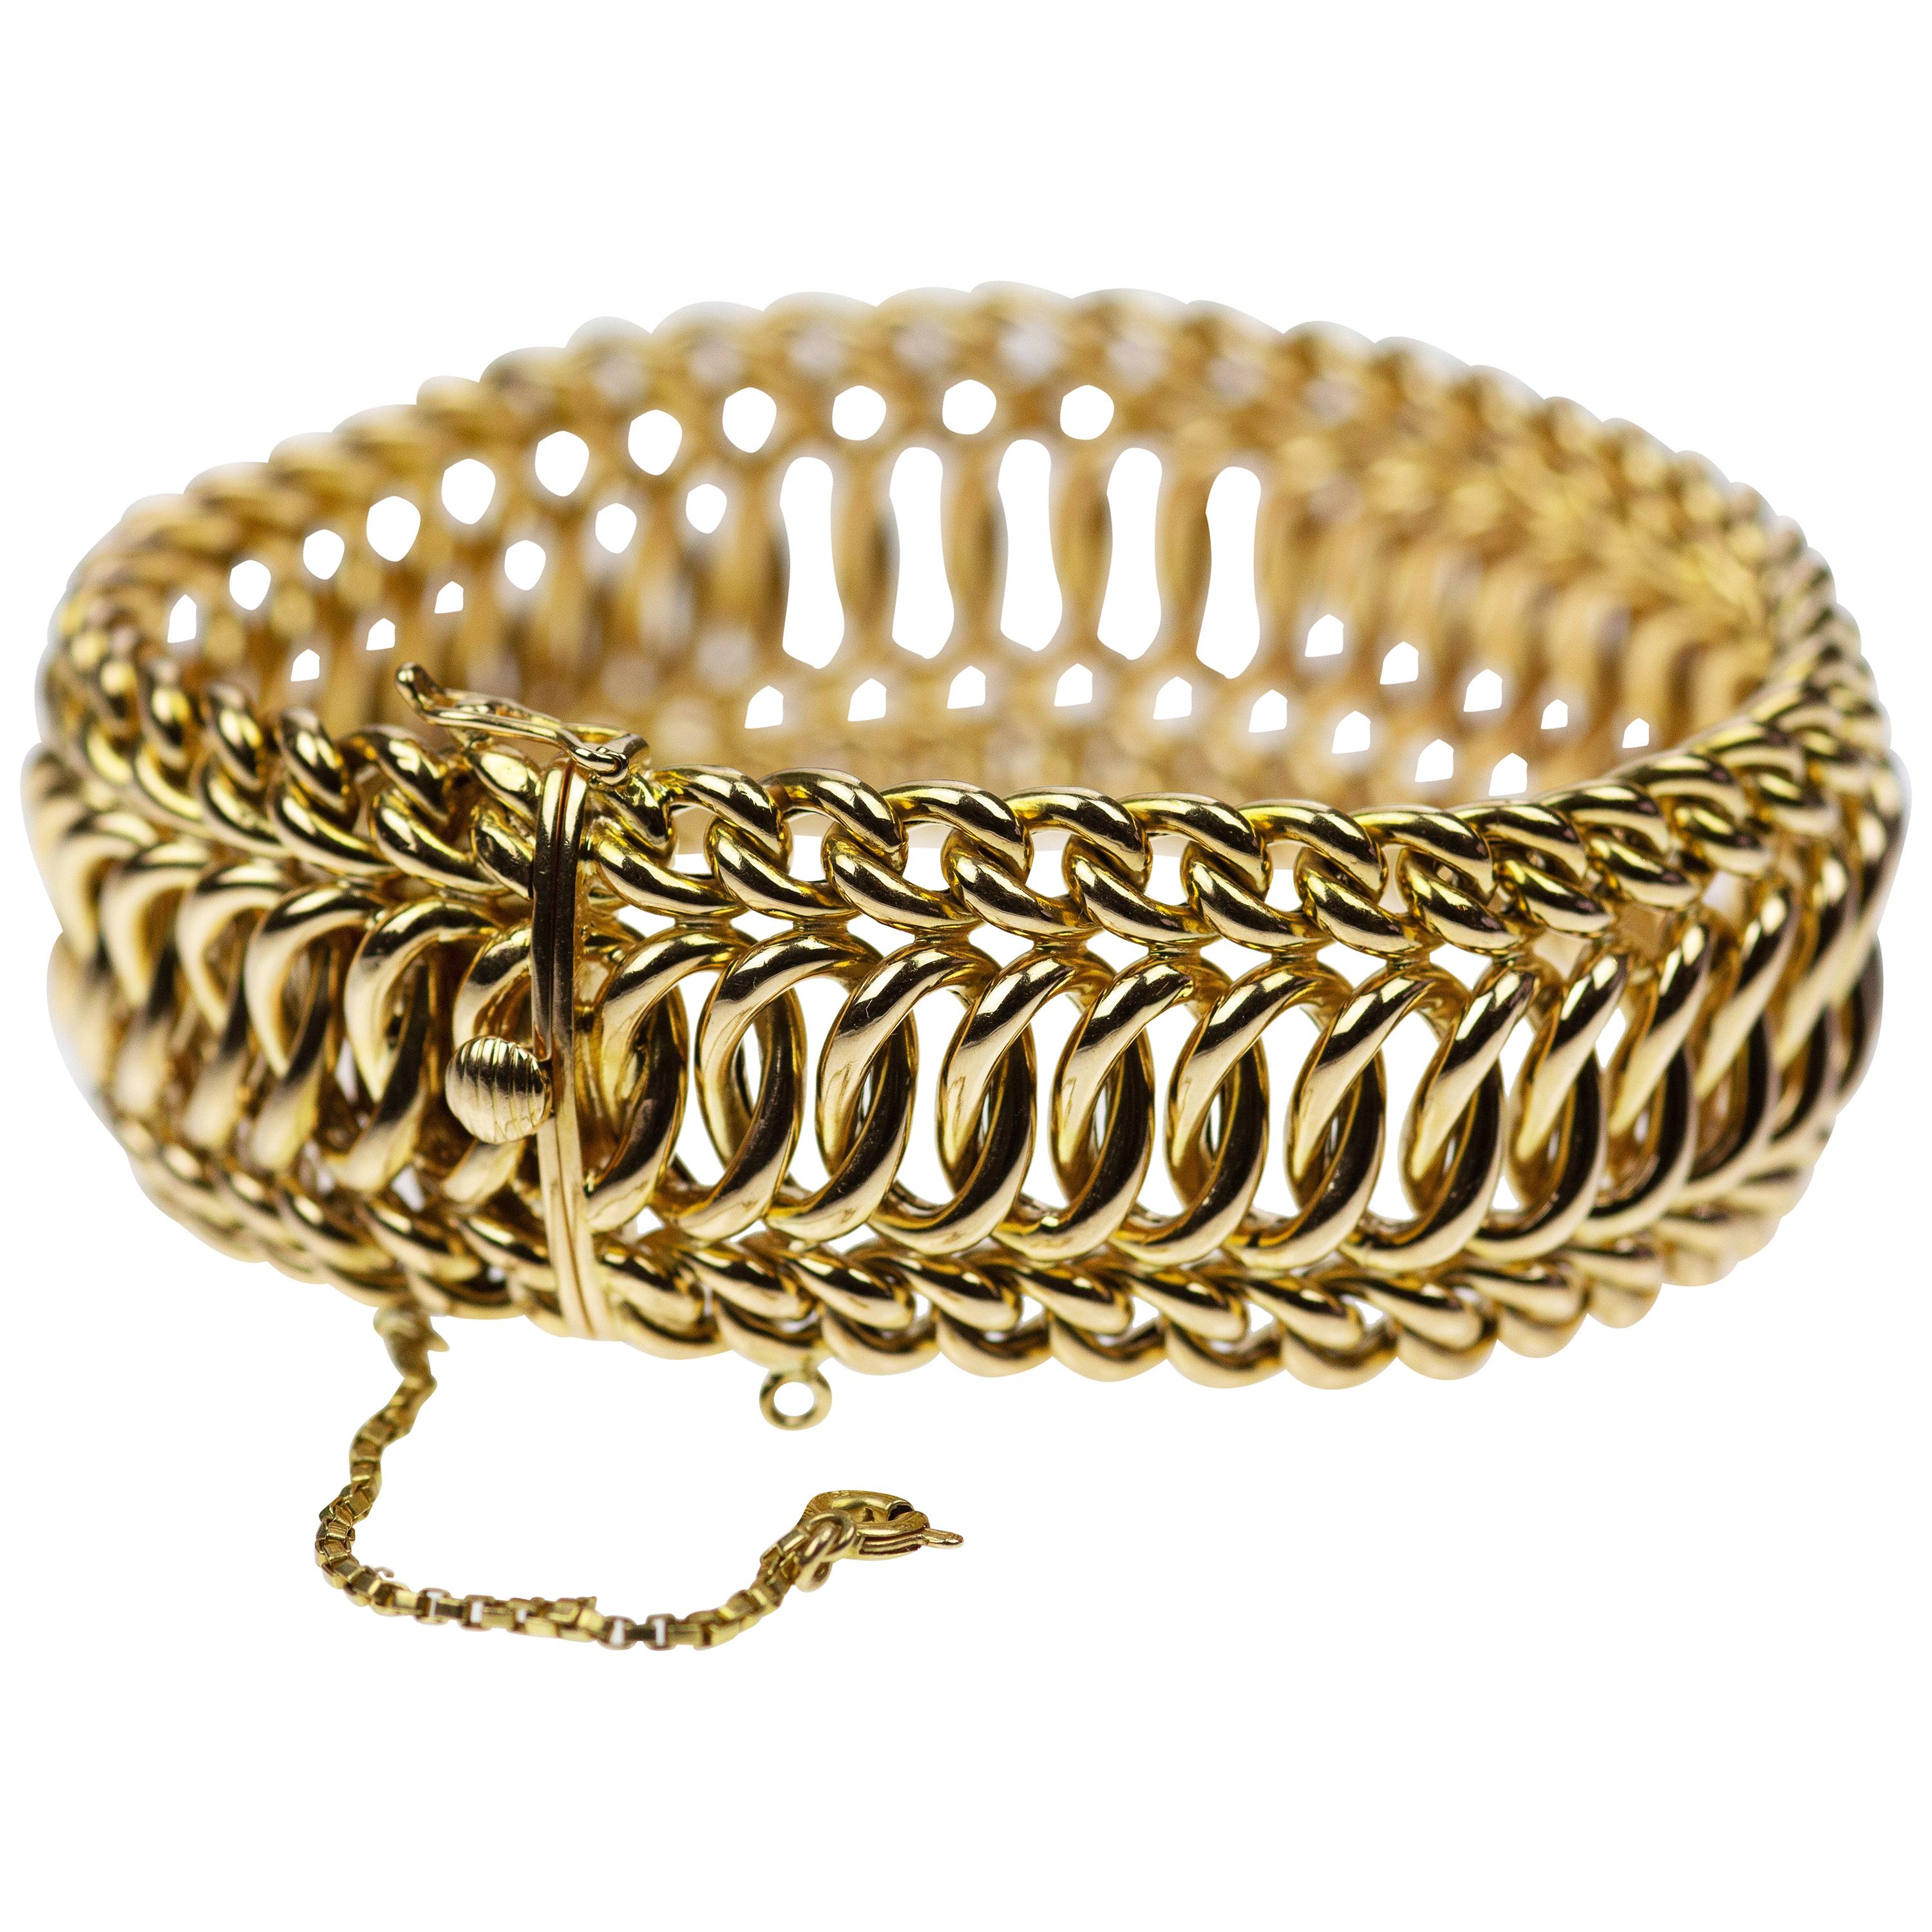 1940s Wide Band Woven Curb Bracelet in 18k Yellow Gold Retro Vintage